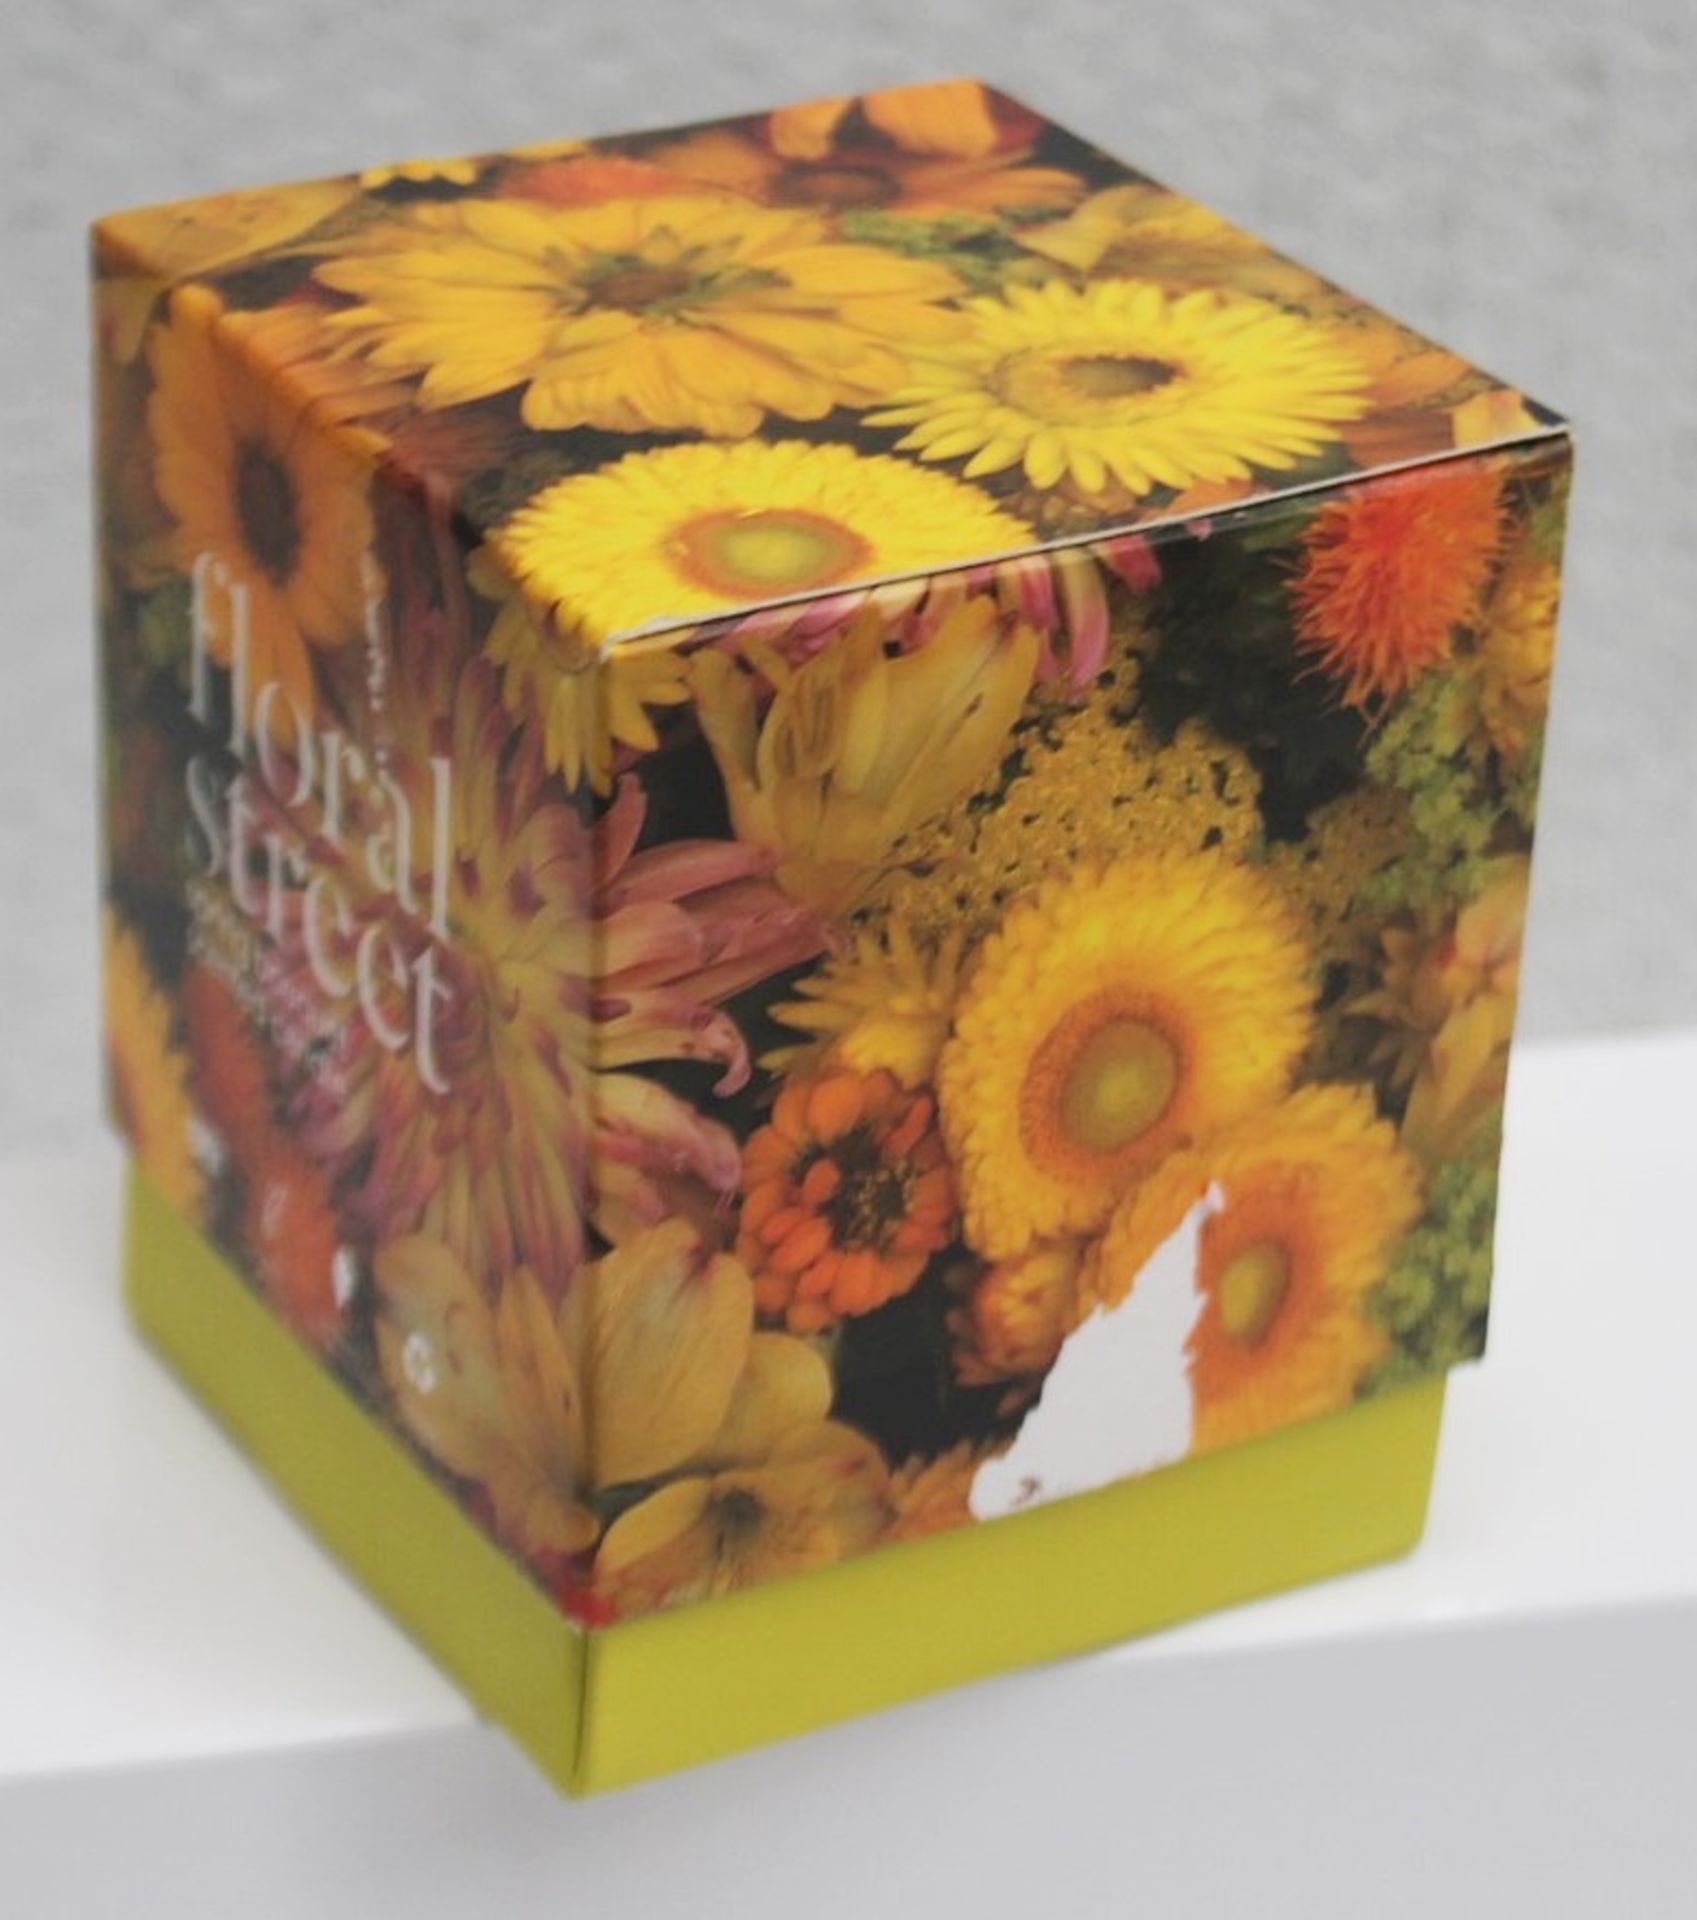 1 x FLORAL STREET Spring Bouquet Candle (200g) - Ref: 7153606/HAS/WH2-C7/02-23-1 - CL987 - Location: - Image 3 of 5